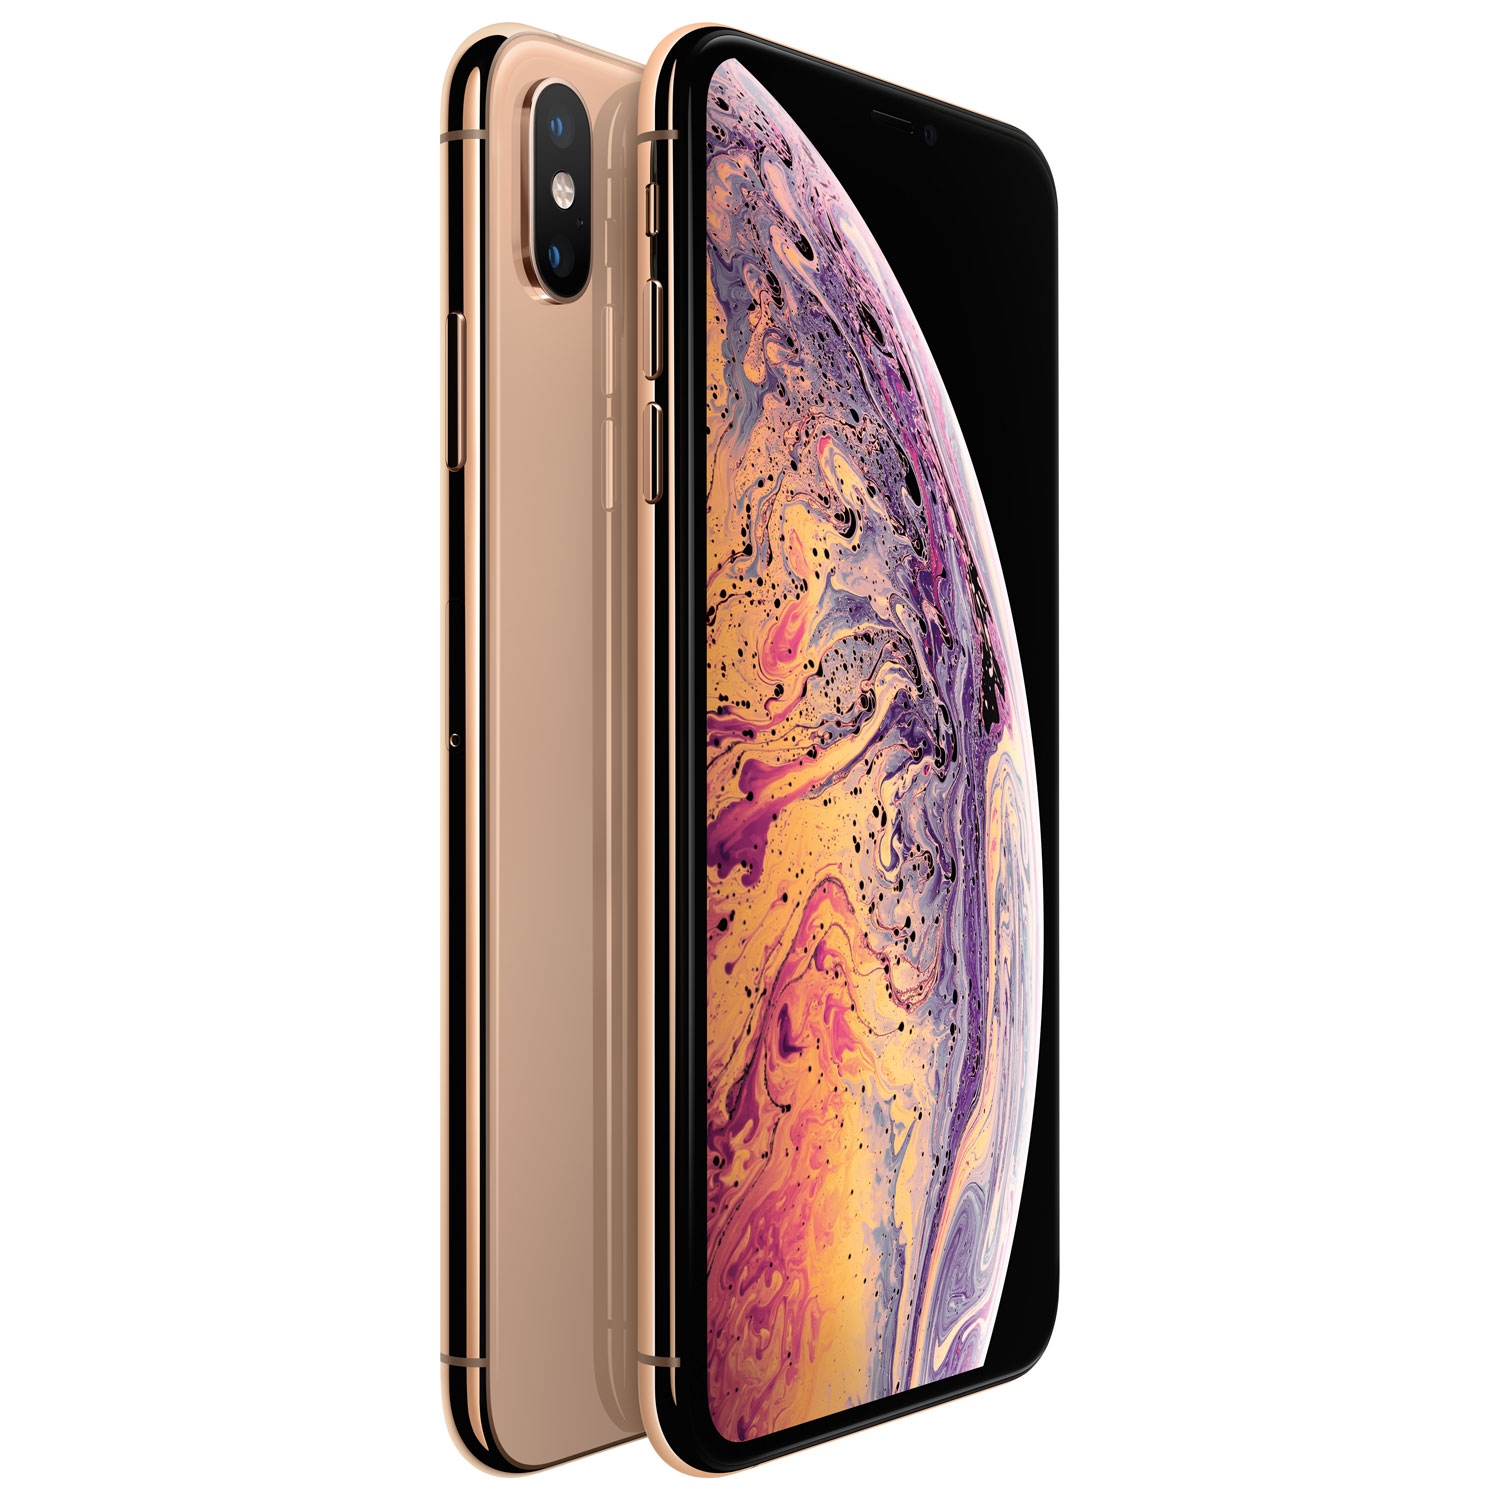 Refurbished (Excellent) - Apple iPhone XS Max 512GB Smartphone - Gold - Unlocked - Certified Refurbished